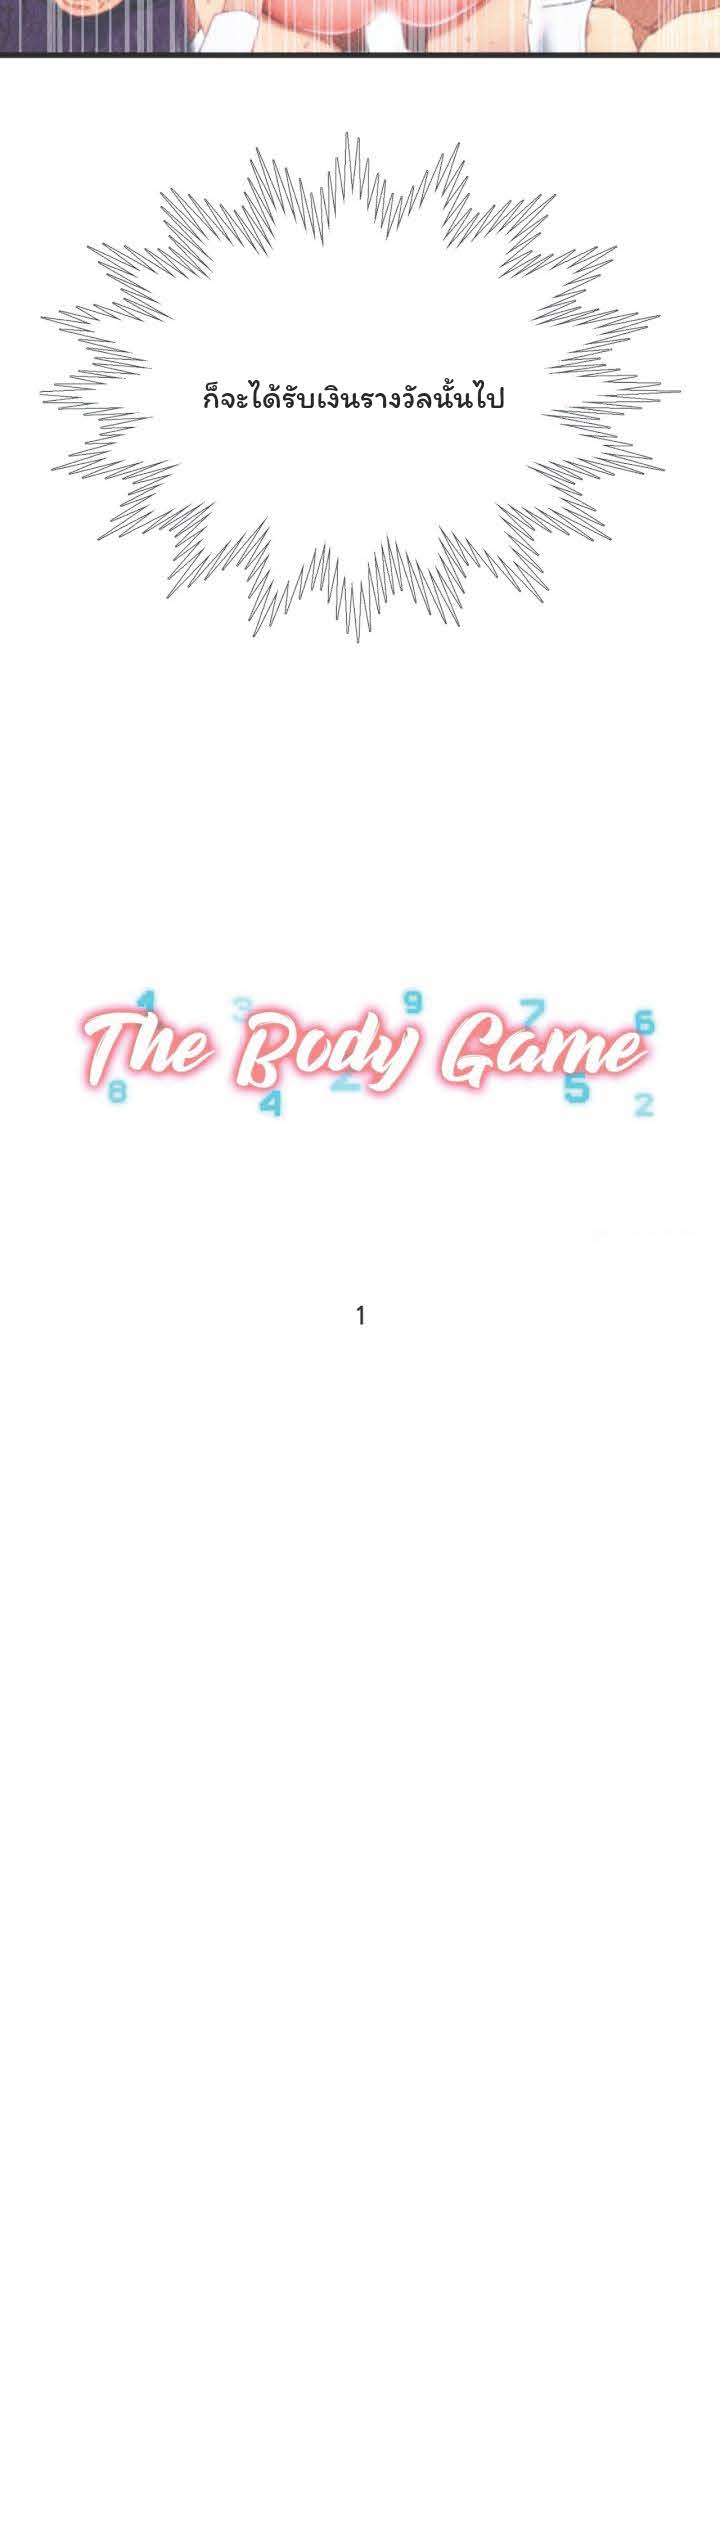 The Body Game 1 (10)